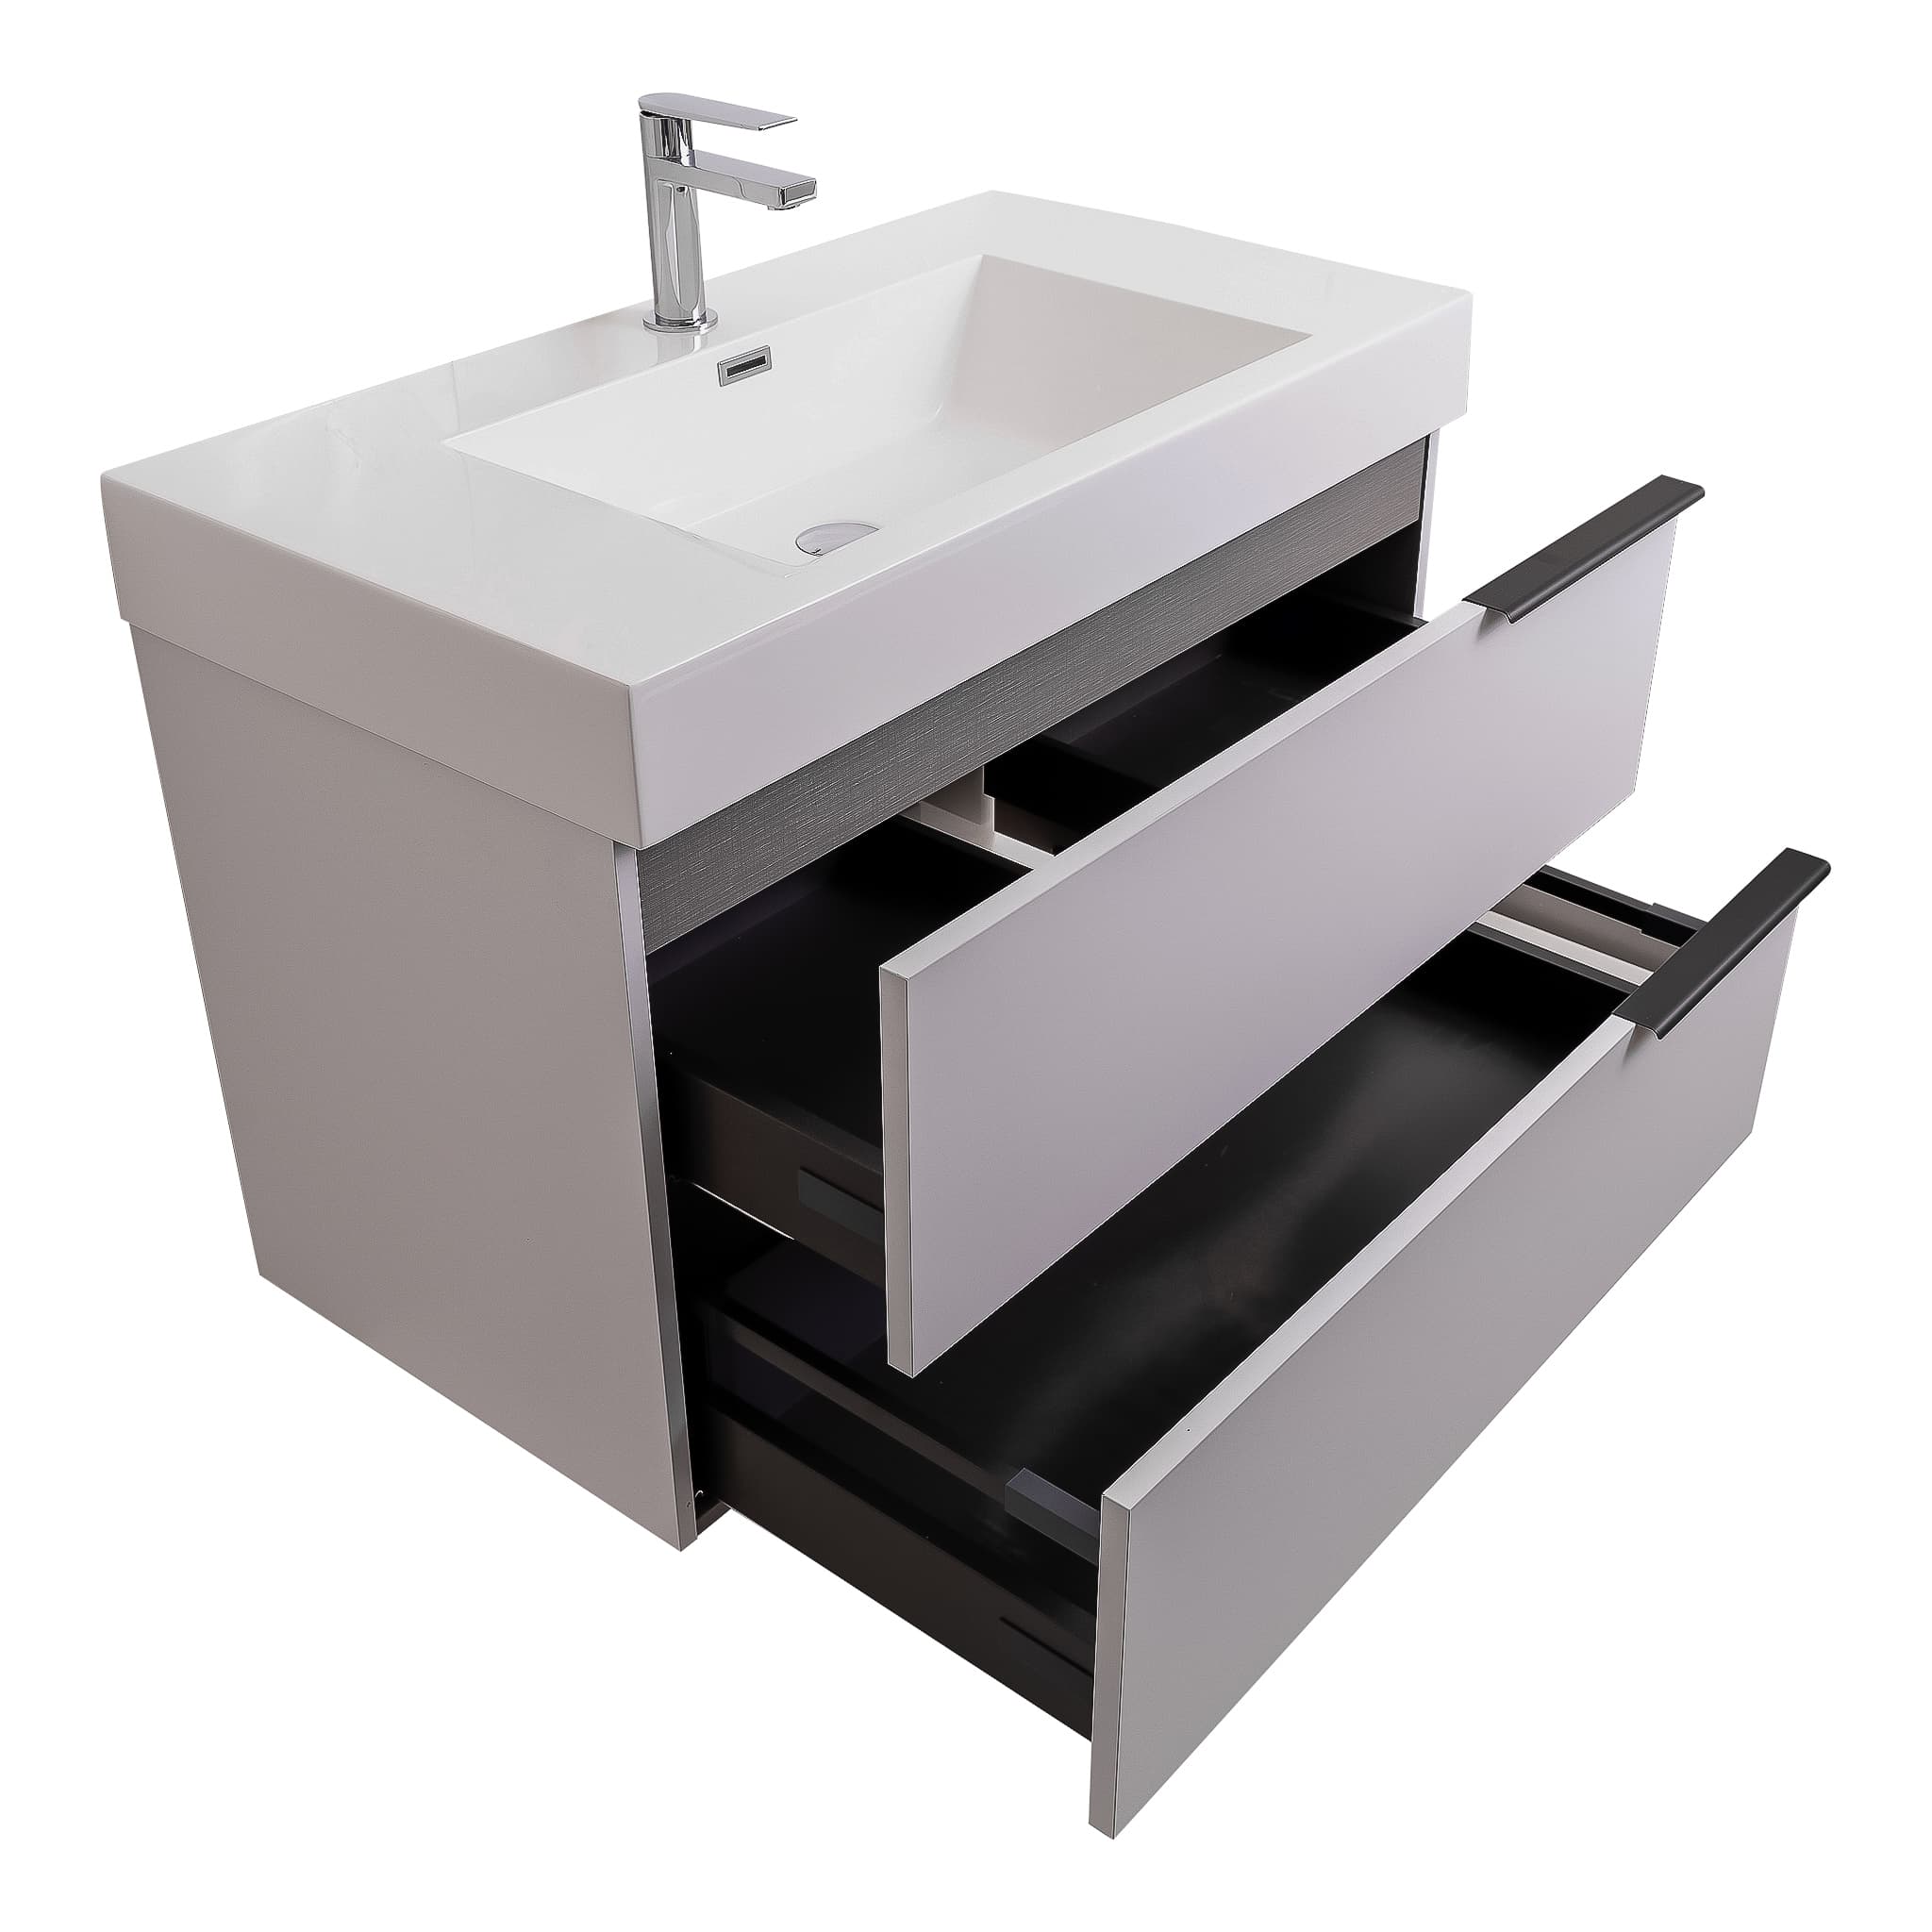 Mallorca 35.5 Matte White Cabinet, Square Cultured Marble Sink, Wall Mounted Modern Vanity Set